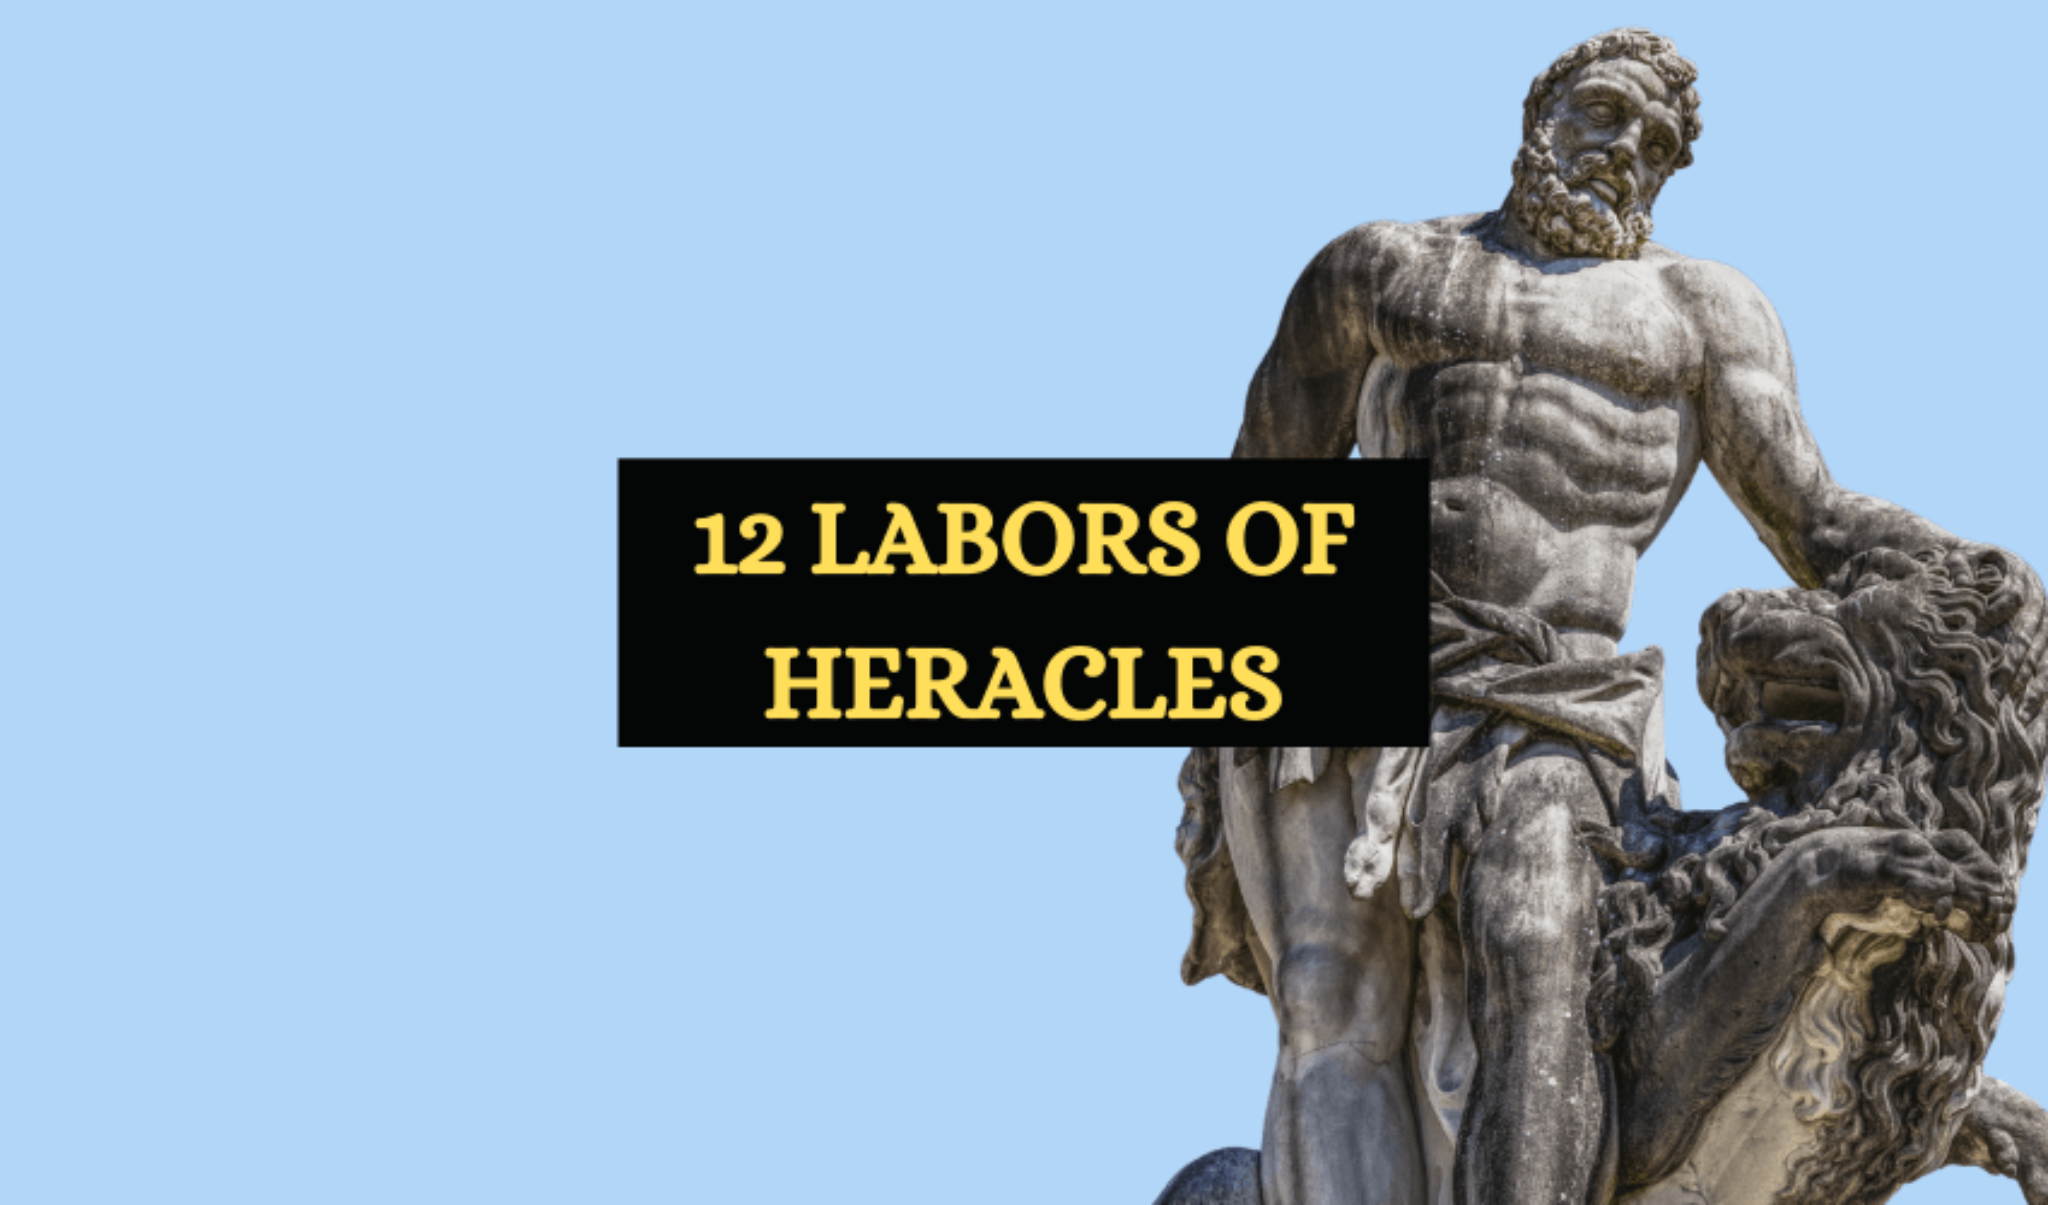 the-12-labors-of-hercules-a-k-a-heracles-explained-symbol-sage